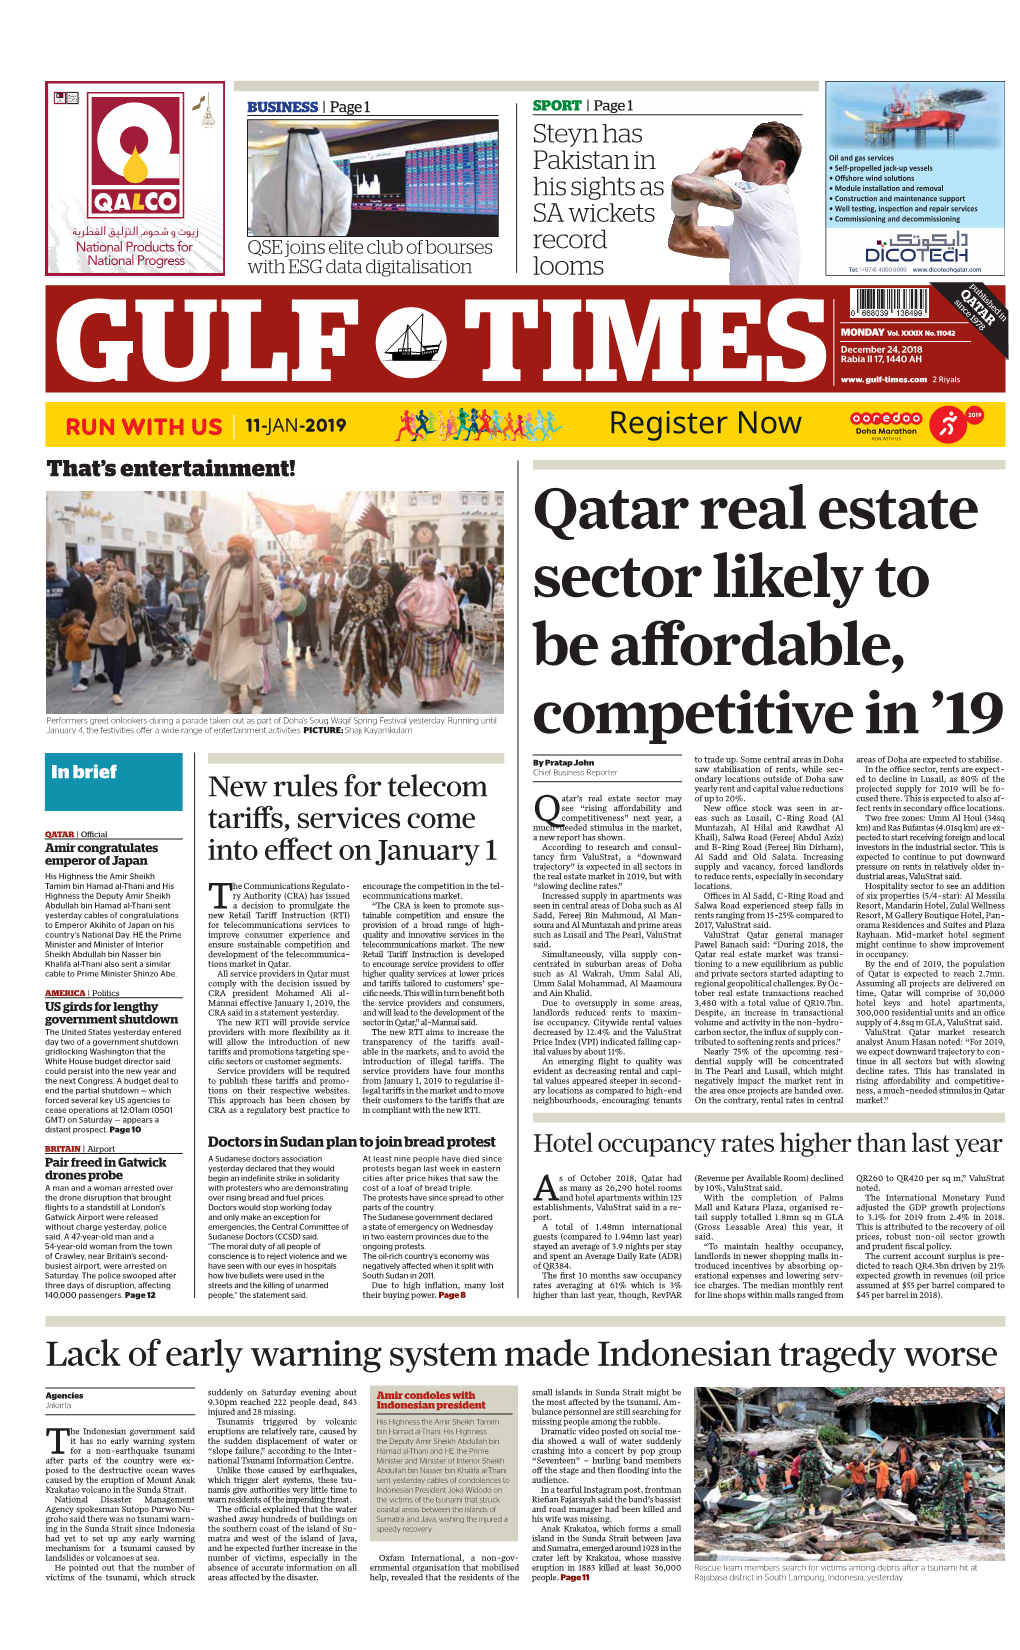 Qatar Real Estate Sector Likely to Be Affordable, Competitive In